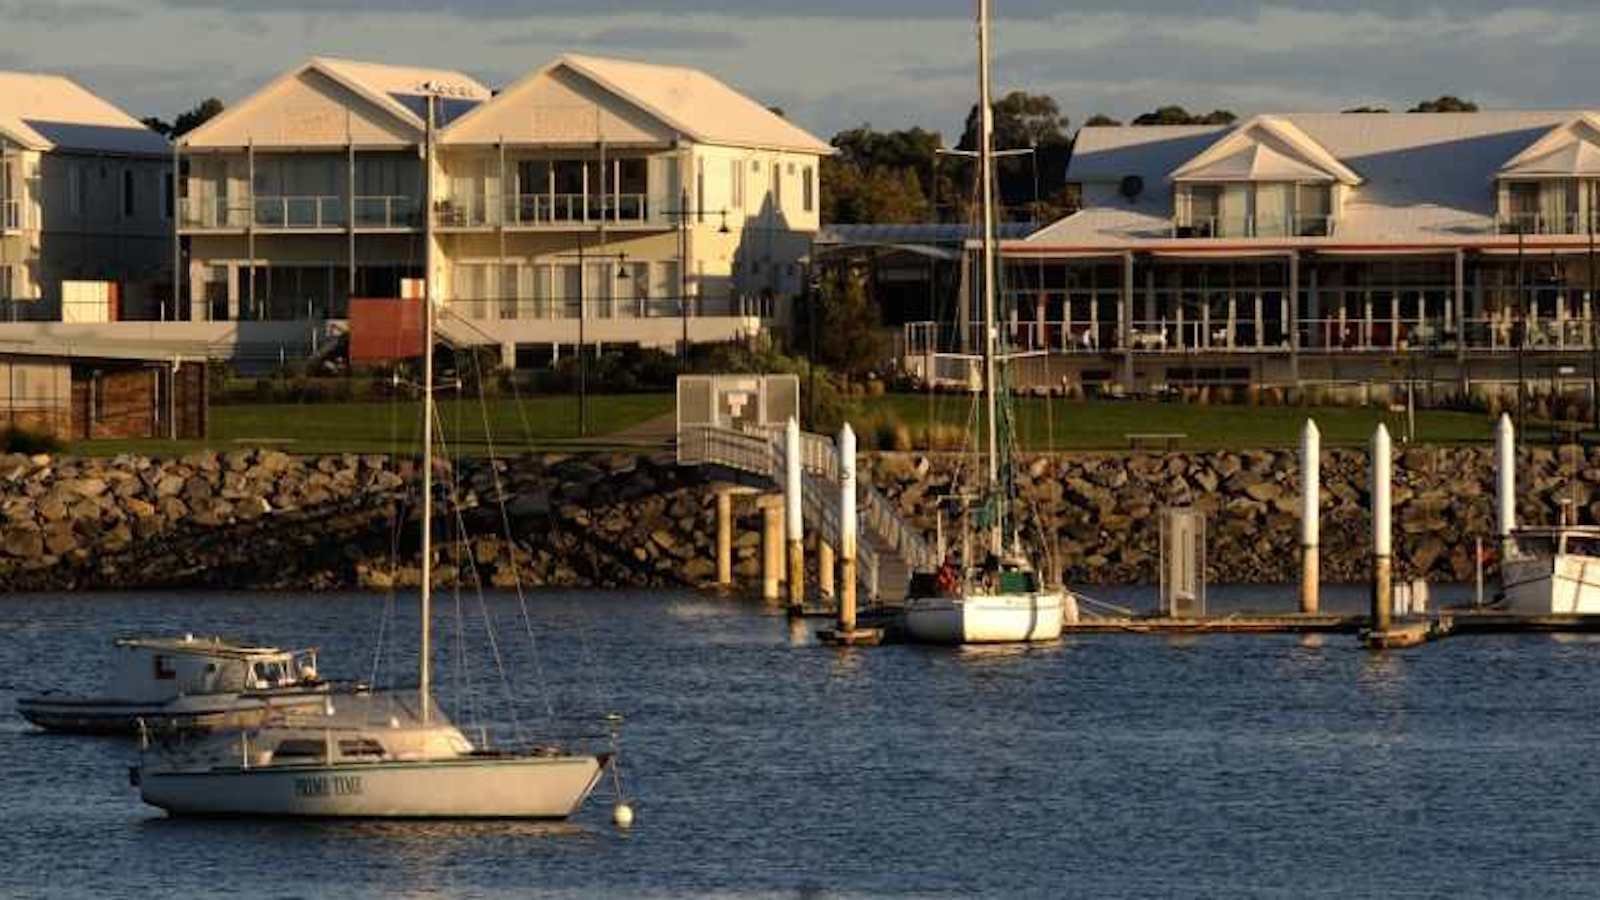 Boom town? An introduction to George Town, Tasmania | - CrowdProperty